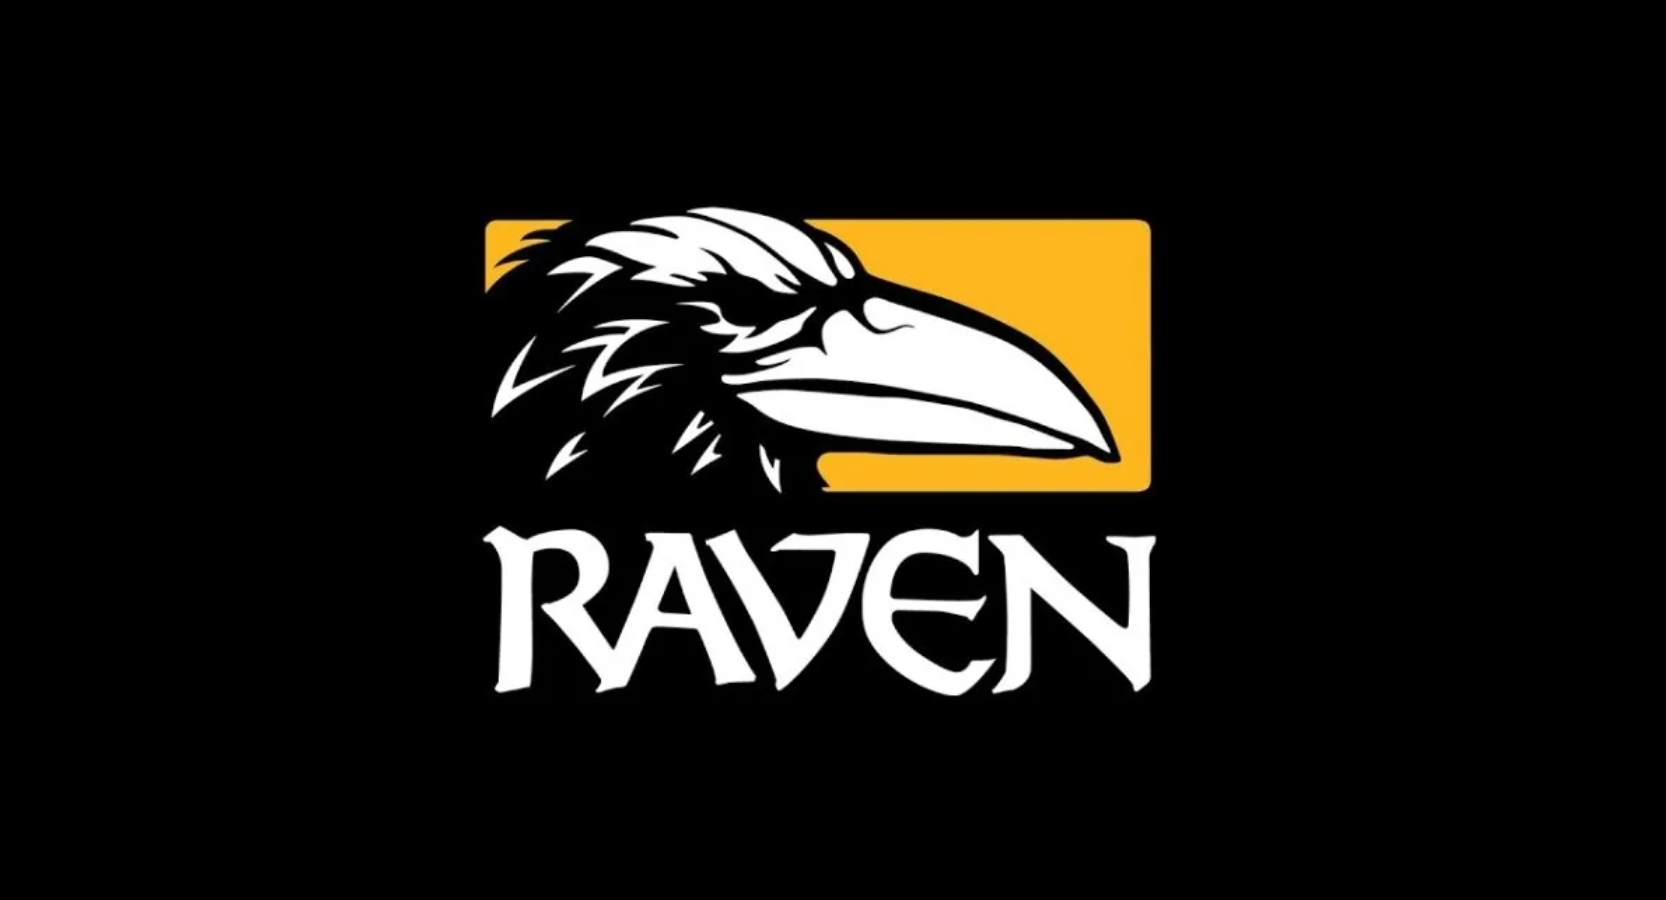 Image for Raven Software strike continues as staff report no response from Activision management